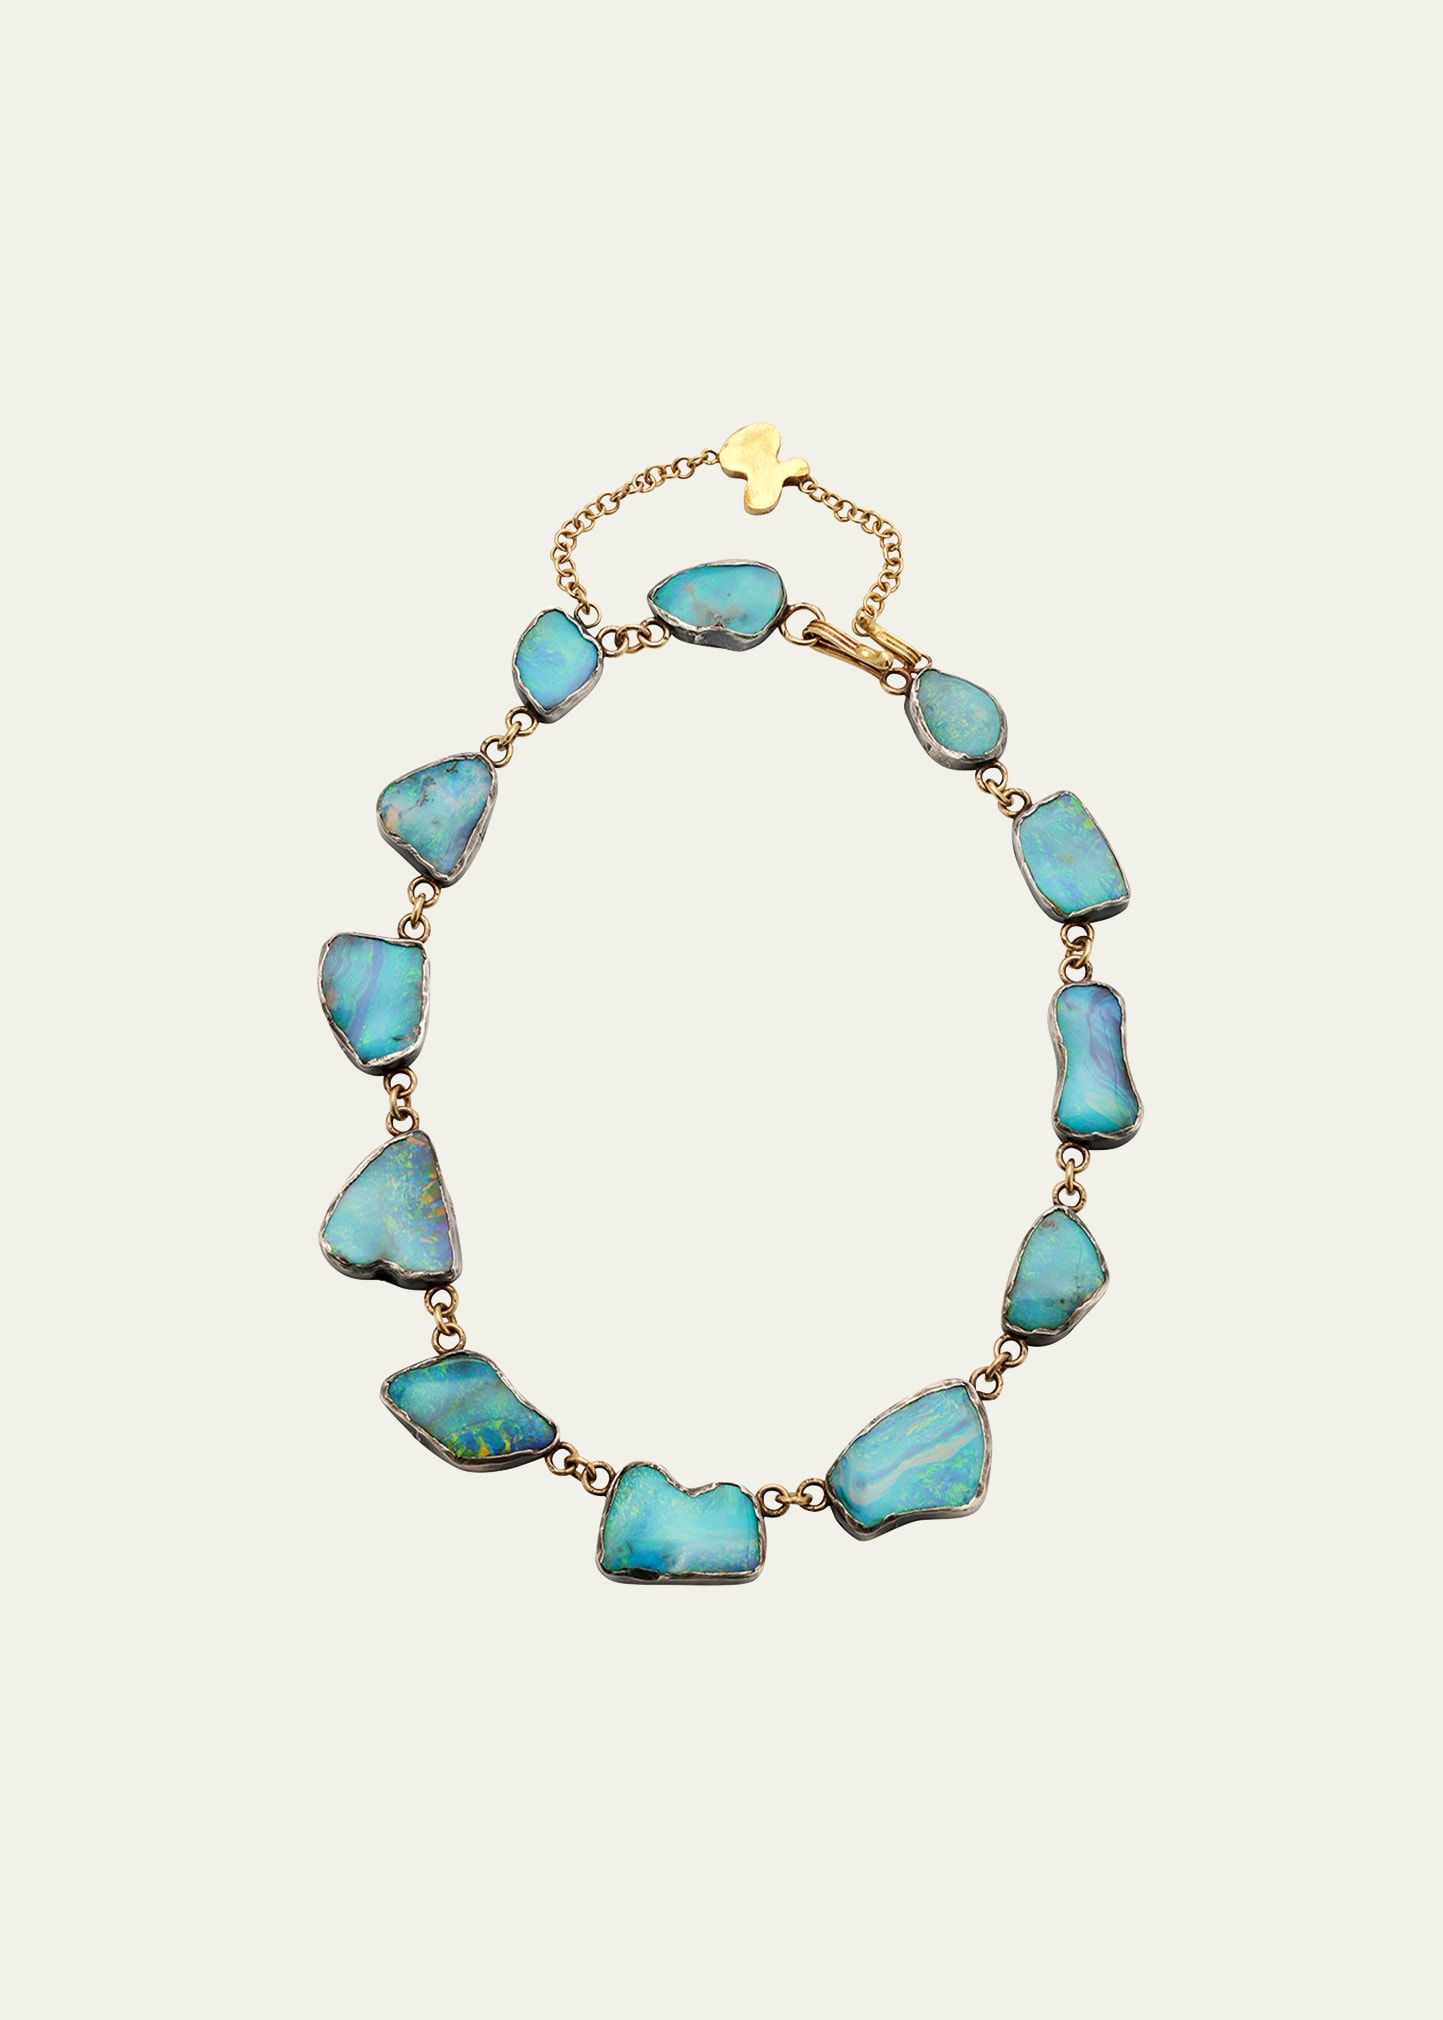 JUDY GEIB Spectacular Puddle Opal Necklace